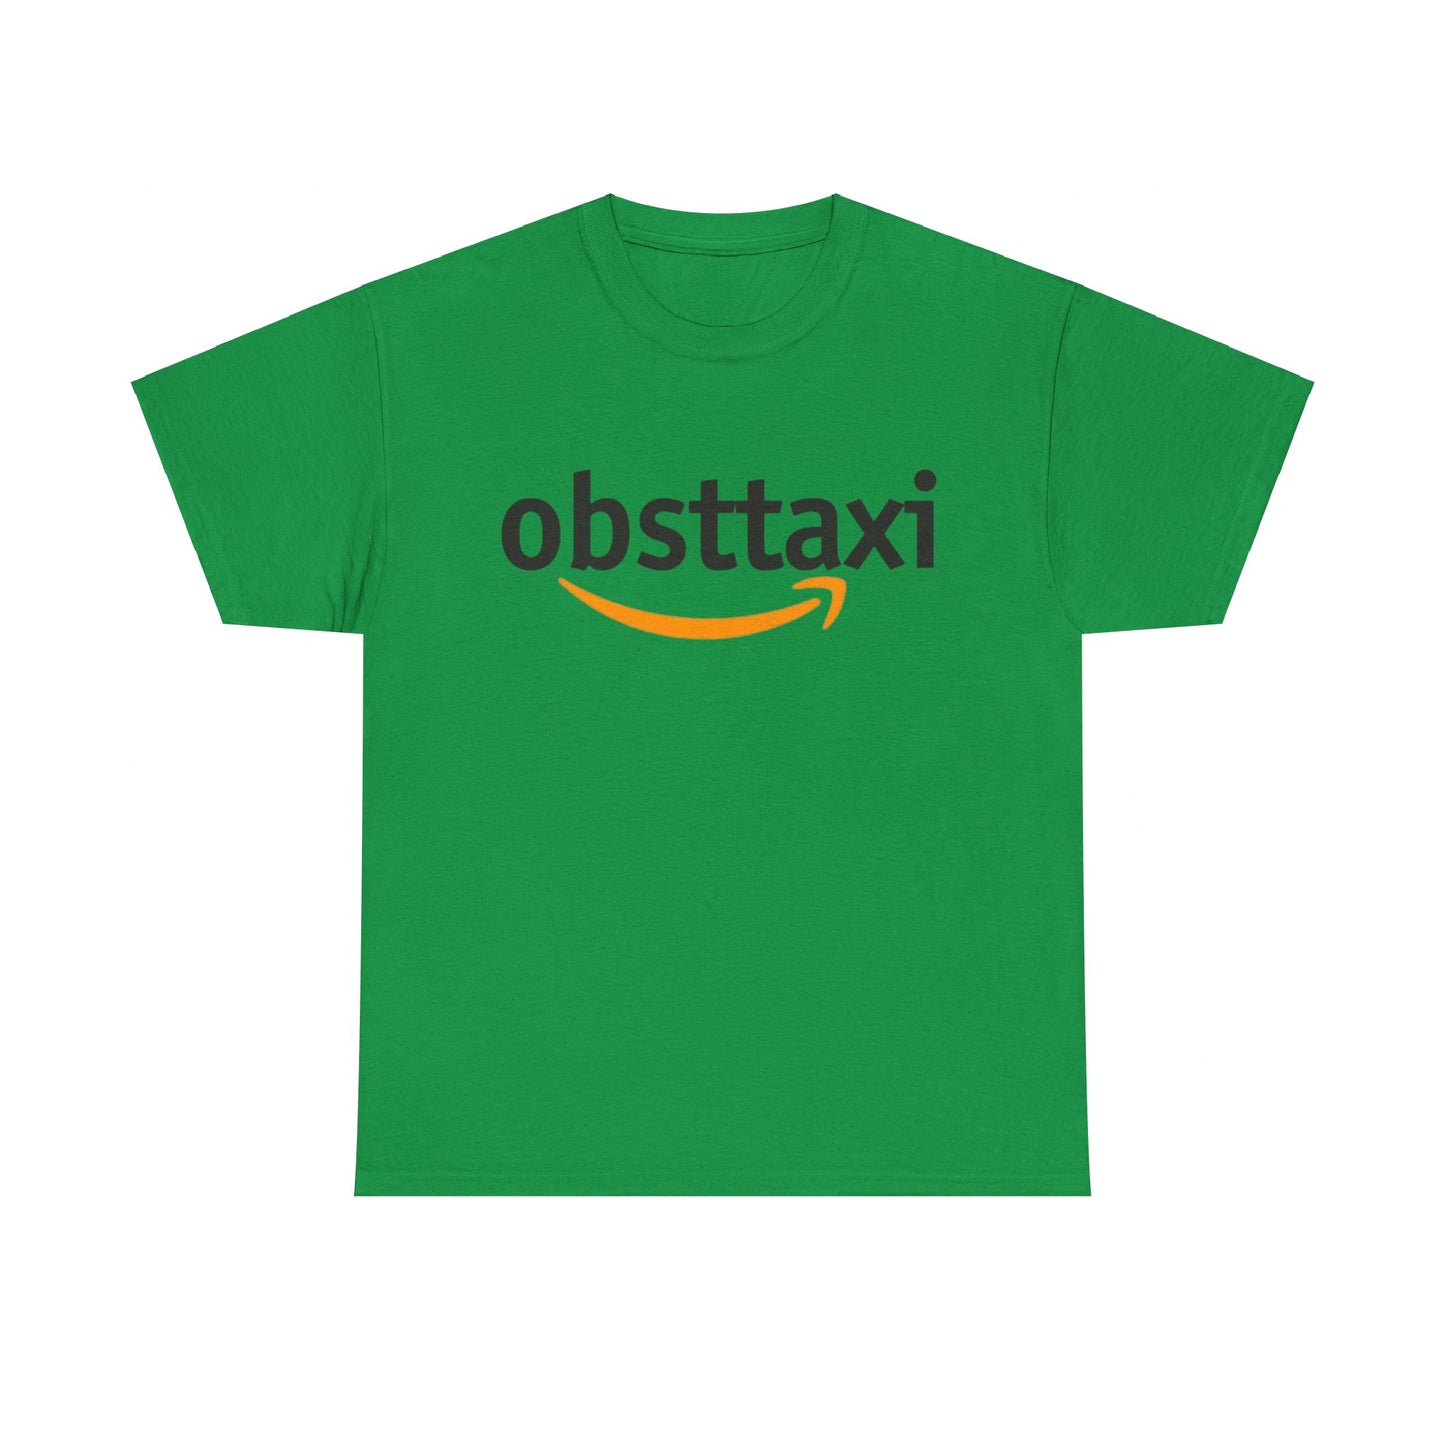 Amazon Meme Shirt Gift for Teenagers, Amazon Obsttaxi T-Shirt, Amazon Prime Merch T-Shirt, Suprise Present for Boys and Girls Unisex fit, Baumwolle Cotton high Quality Basics, Funny TShirt for everybody, Statement Shirt, Obsttaxi for Plugs Tshirt, Trapping in Berlin Germany Tshirt